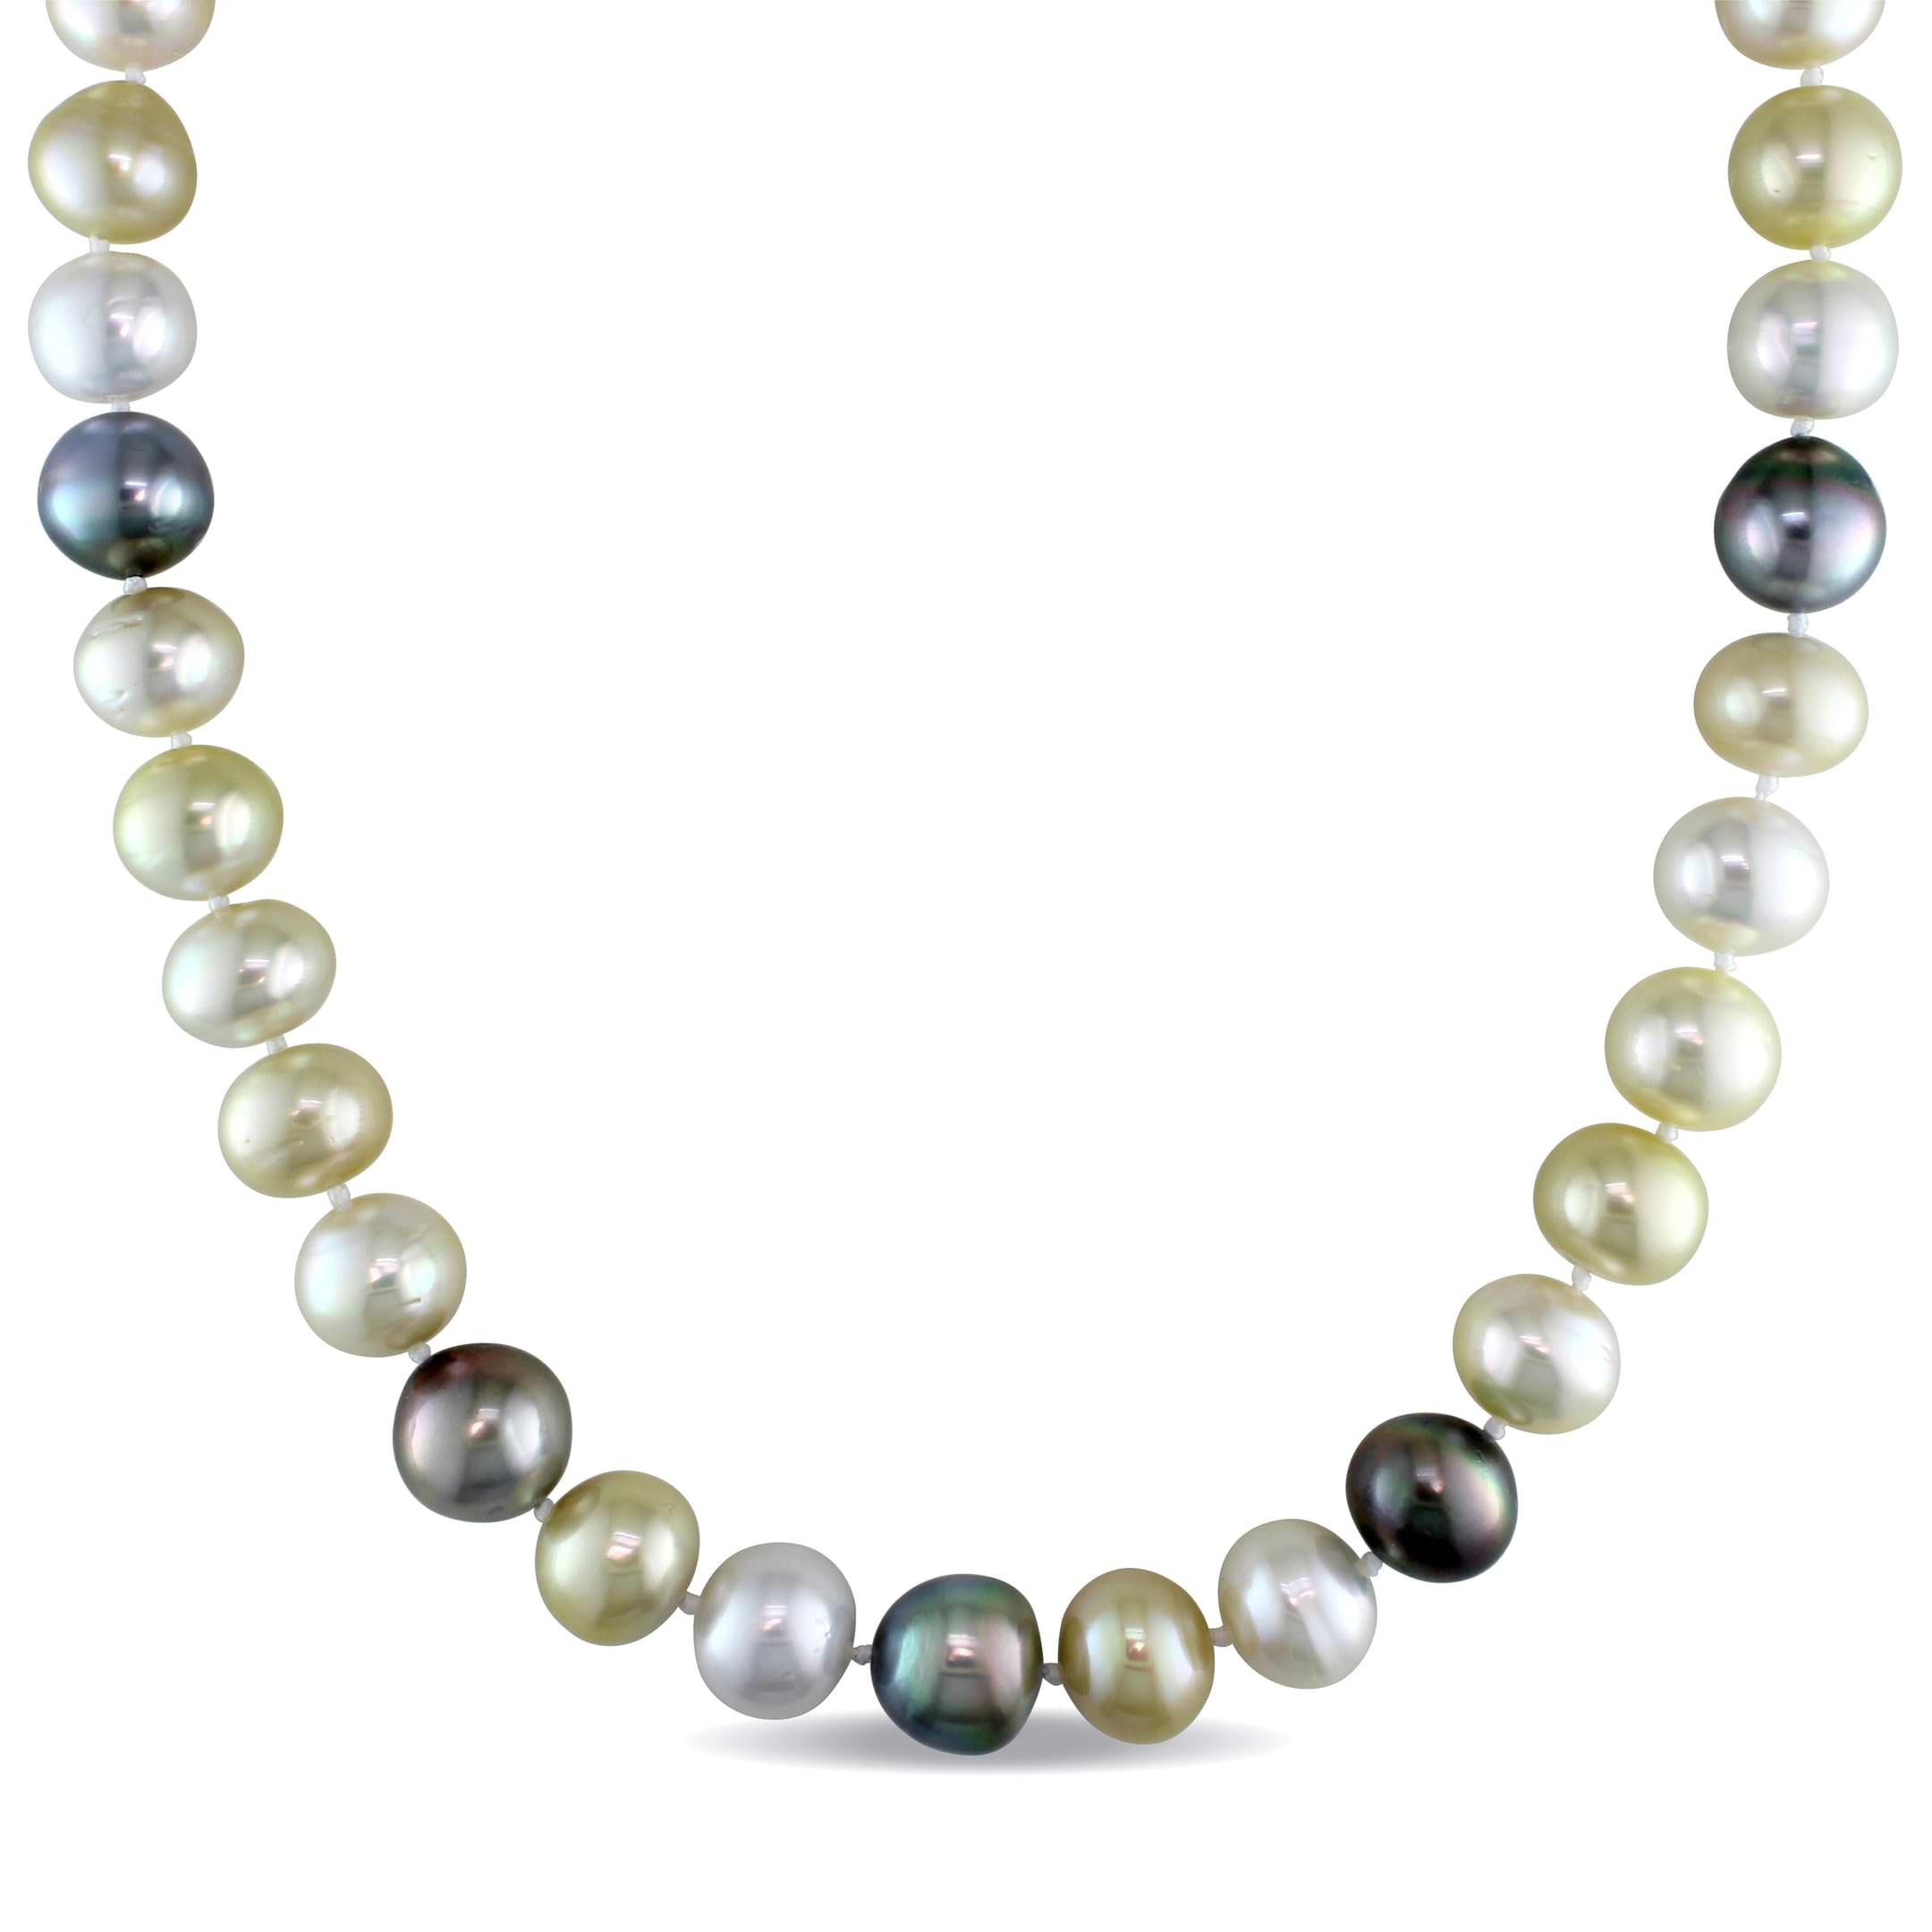 Multi-Colored South Sea & Tahitian Pearl Necklace 14k Y Gold (10-12mm)